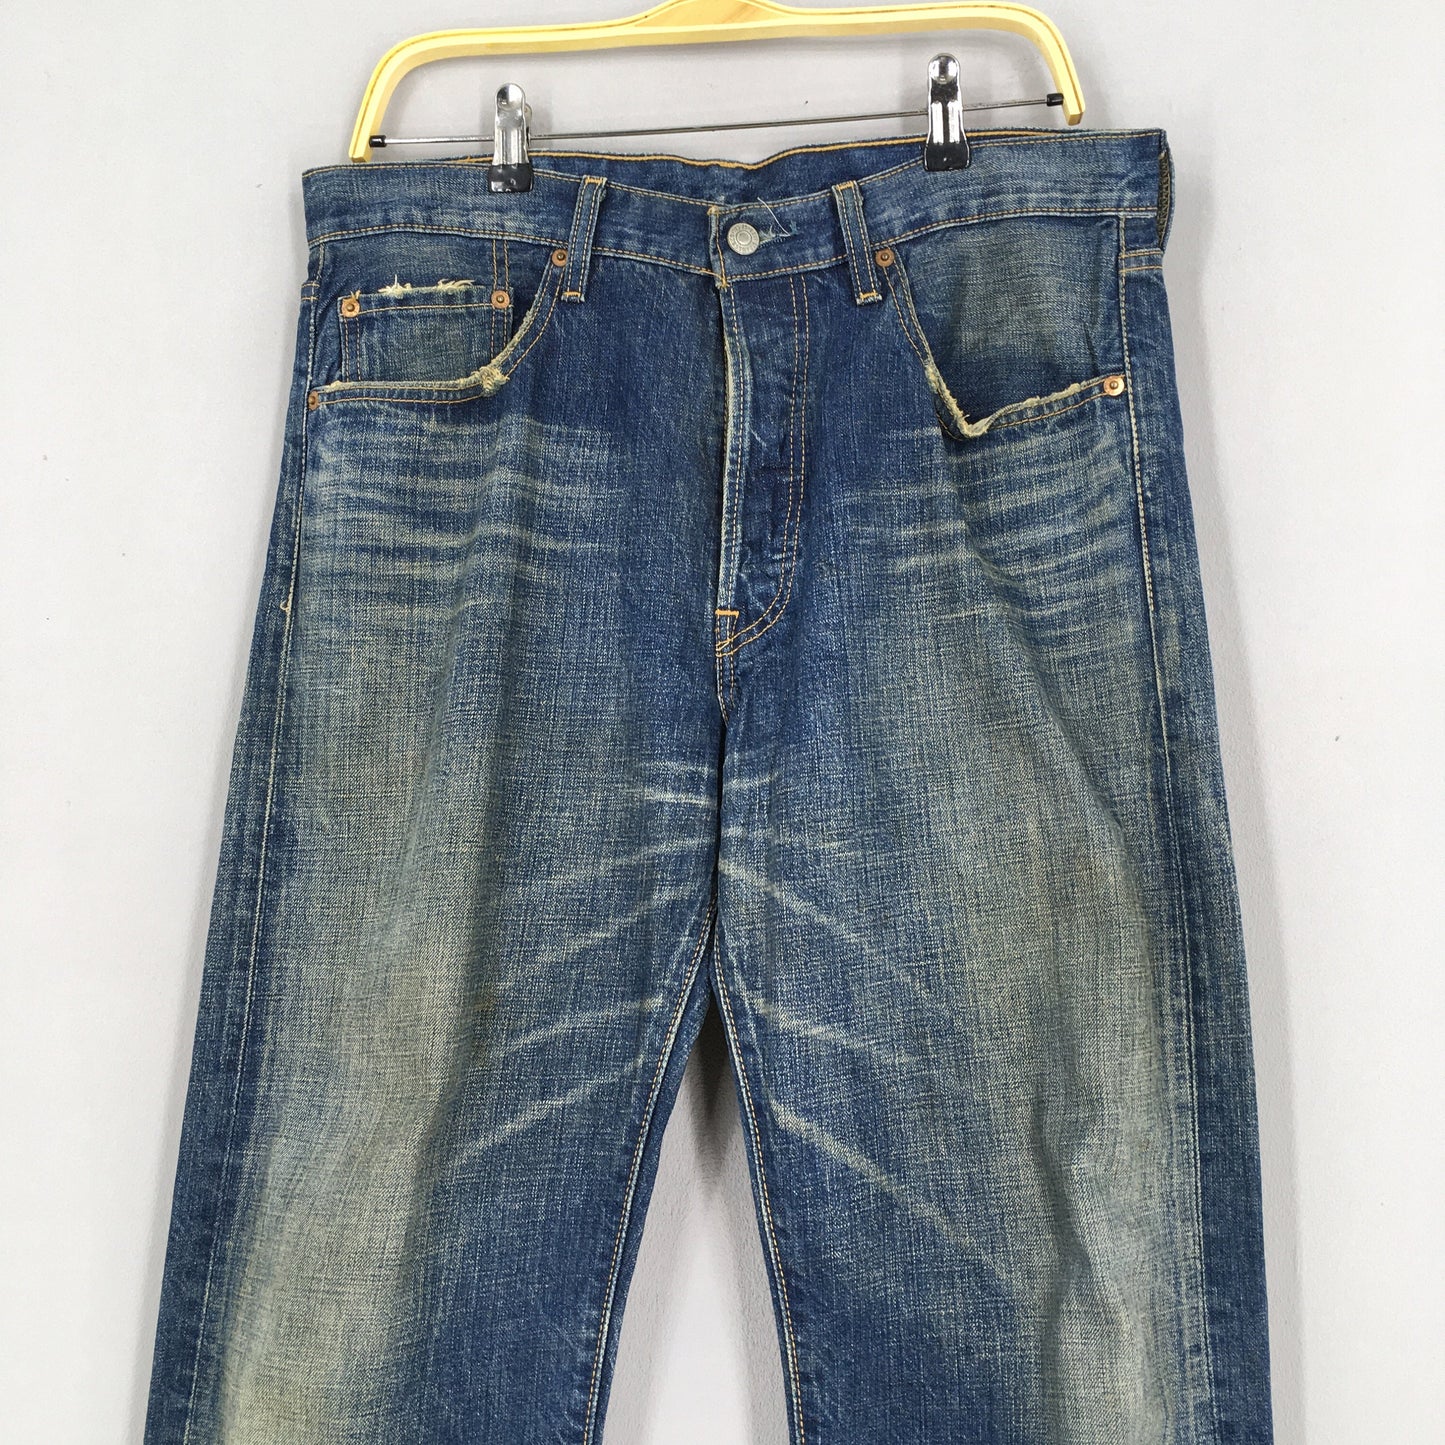 Levi's 501 Faded Blue Jeans Size 32x32